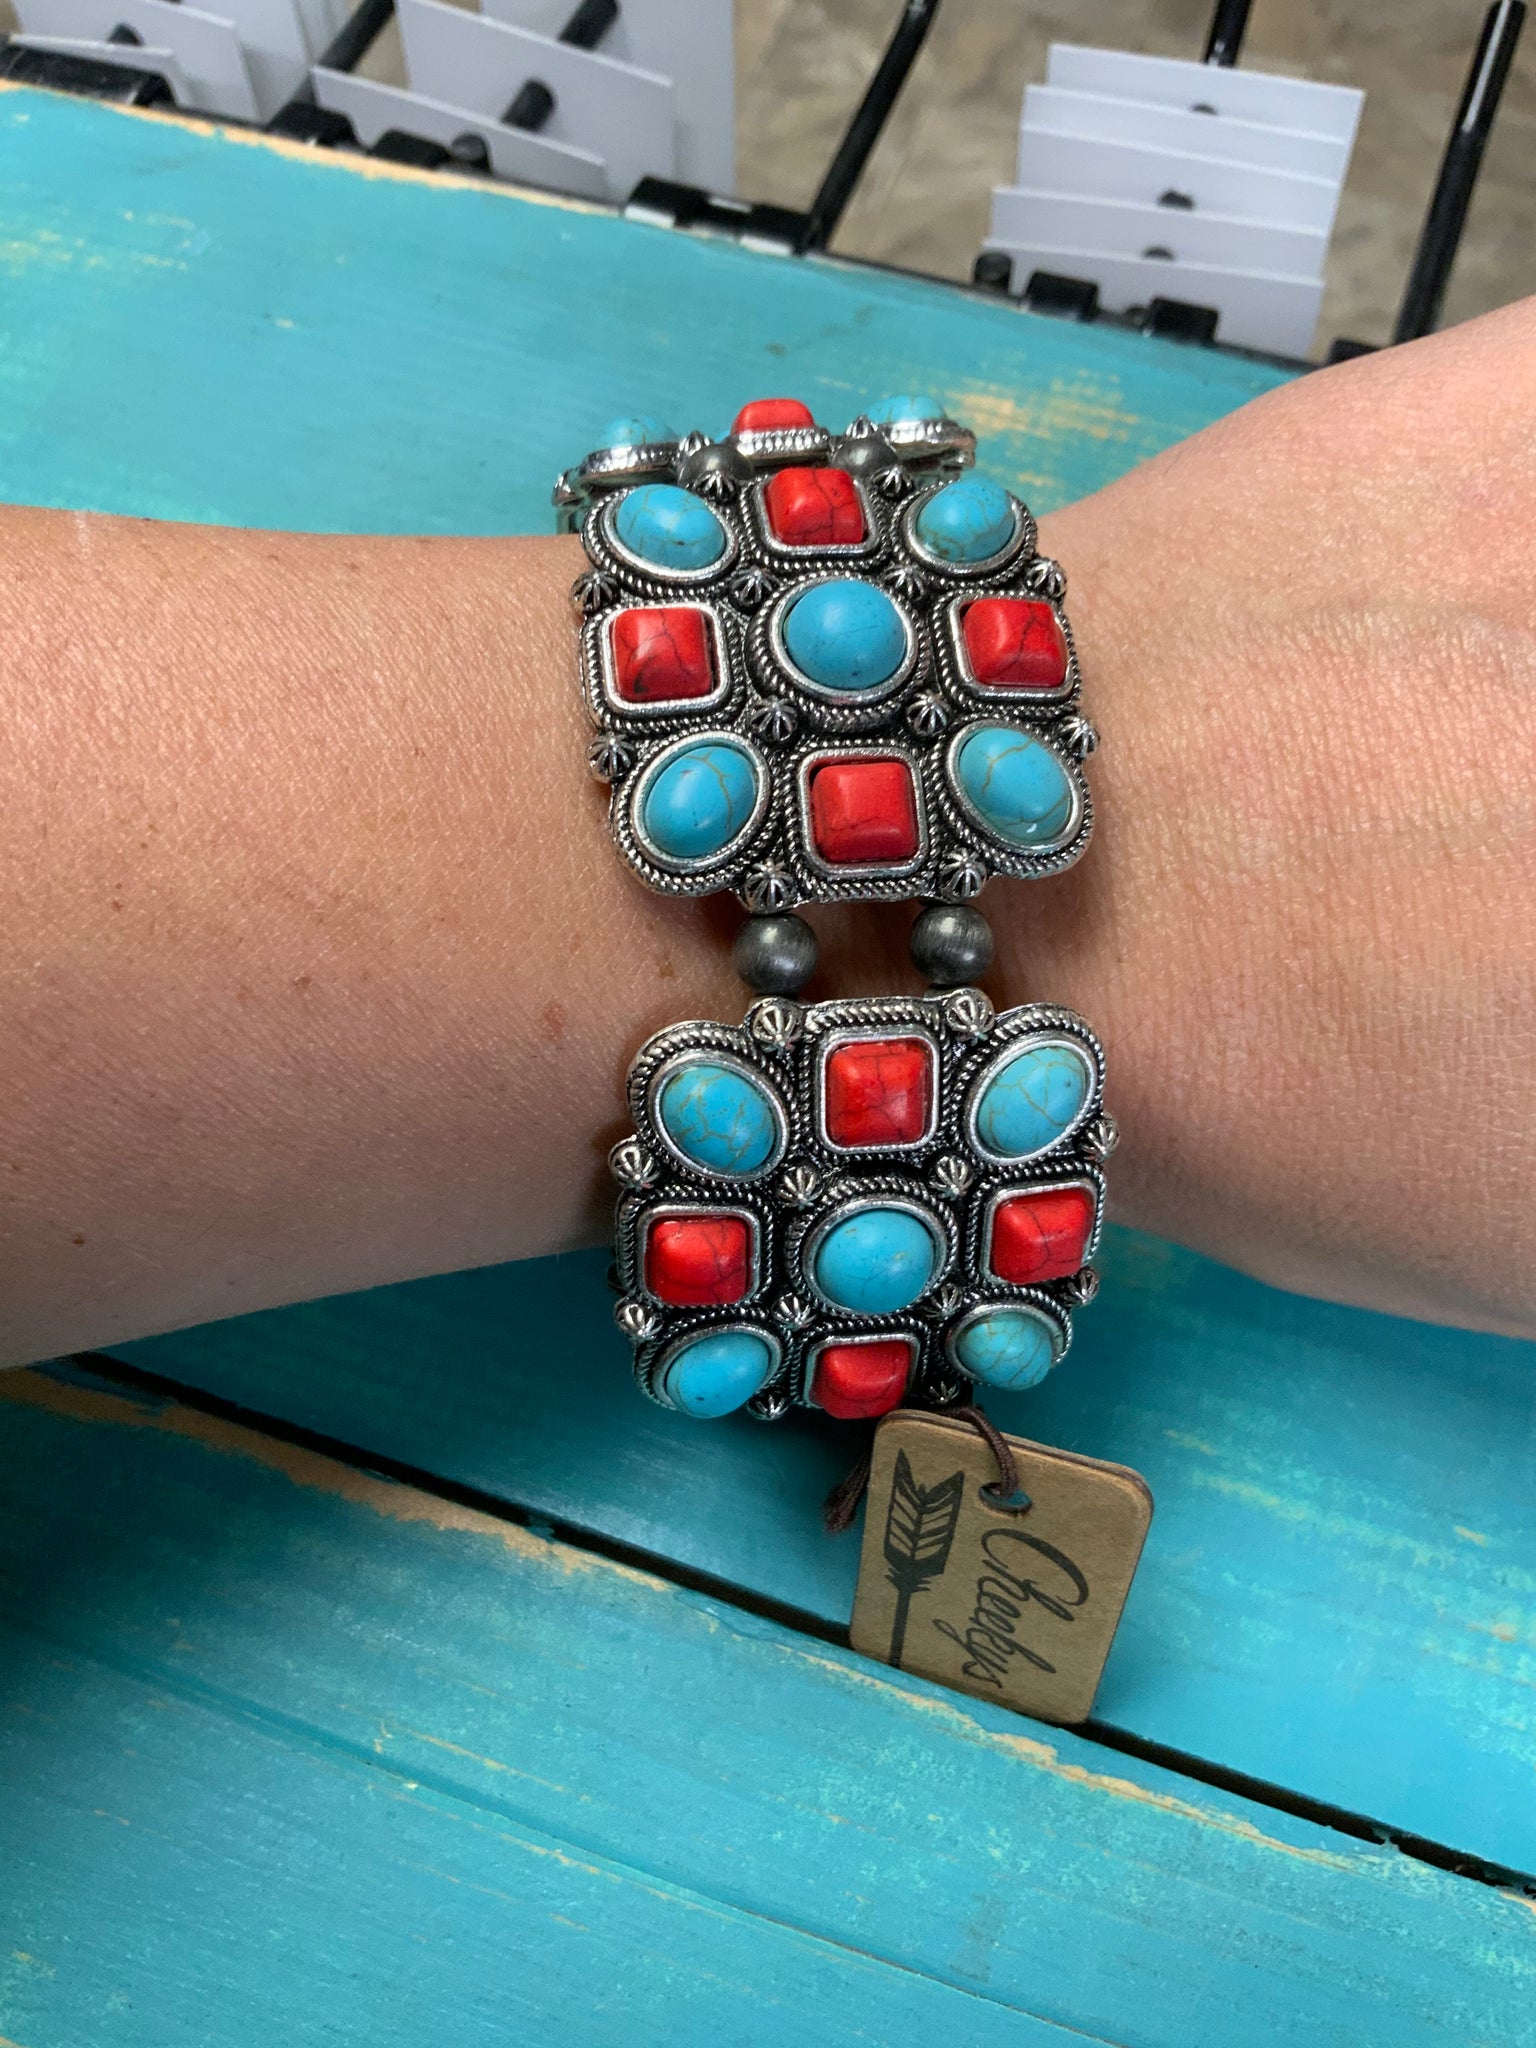 Cheekys red and turquoise stretch bracelet